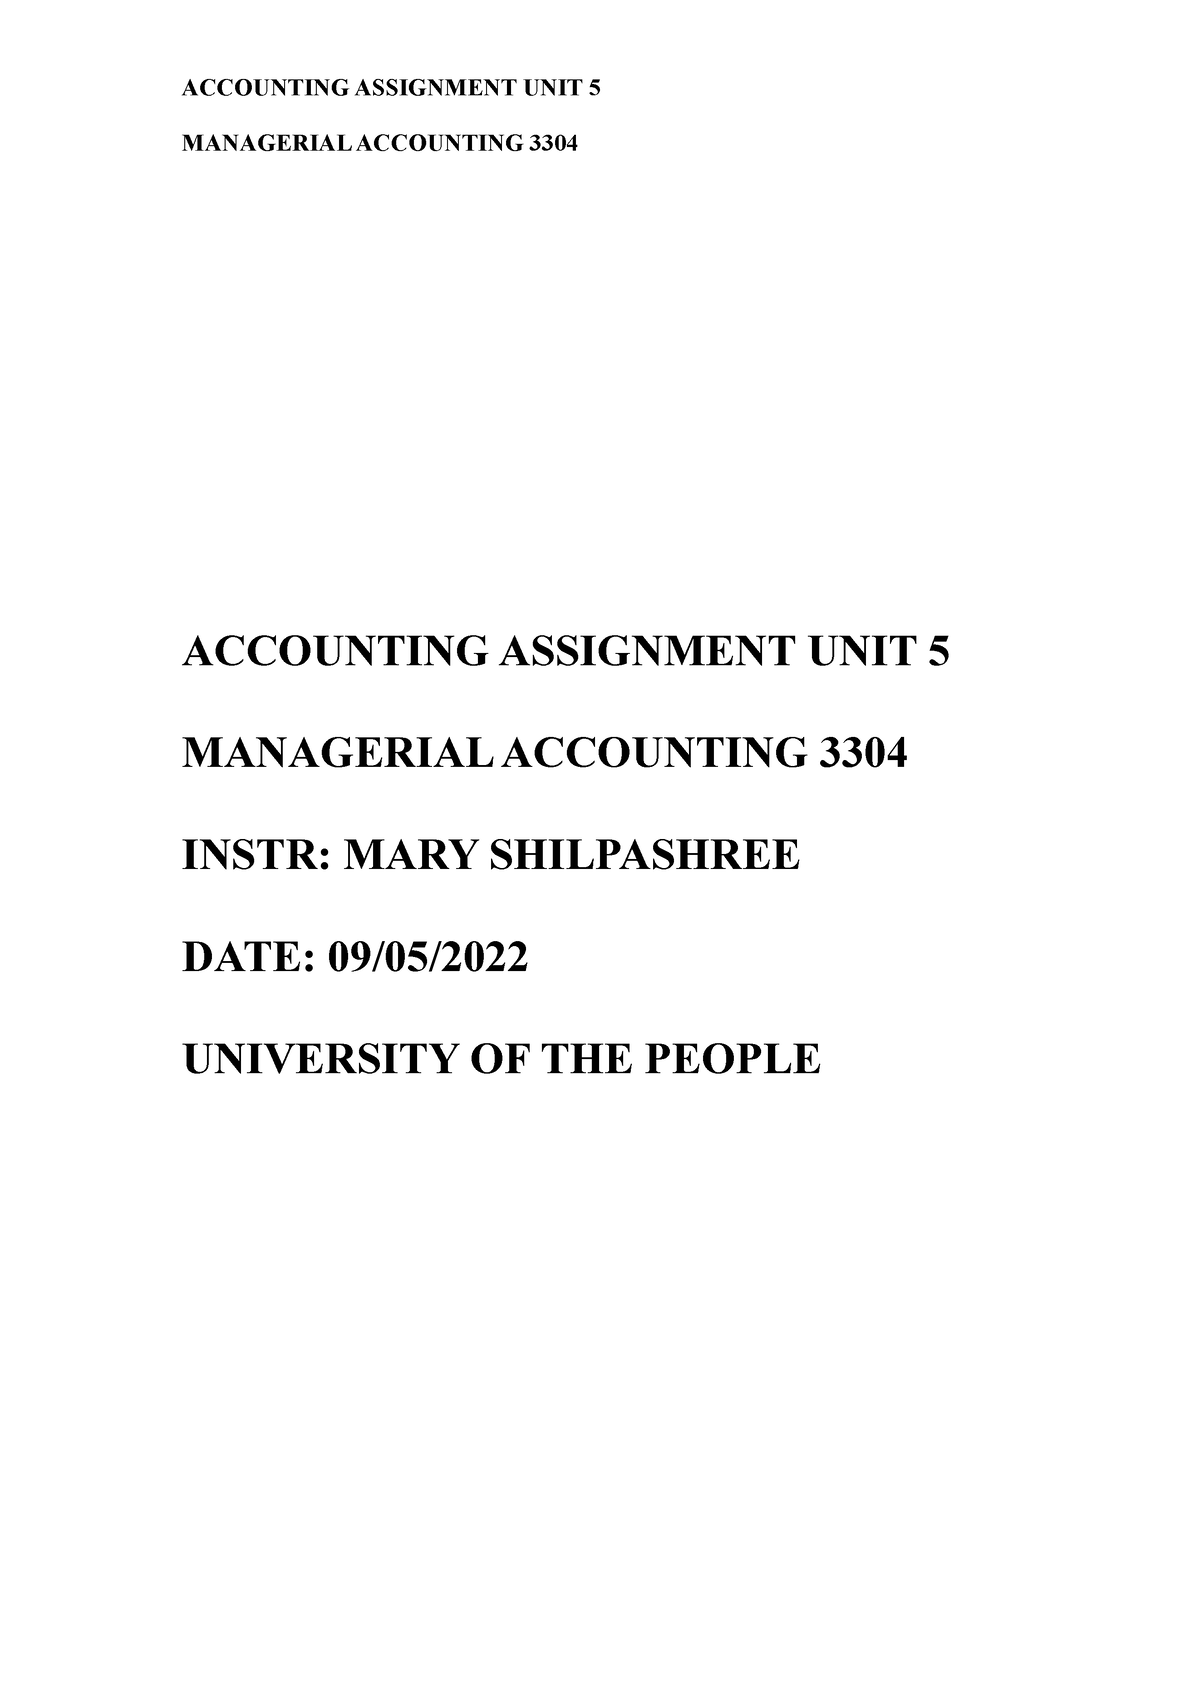 accounting assignment utar